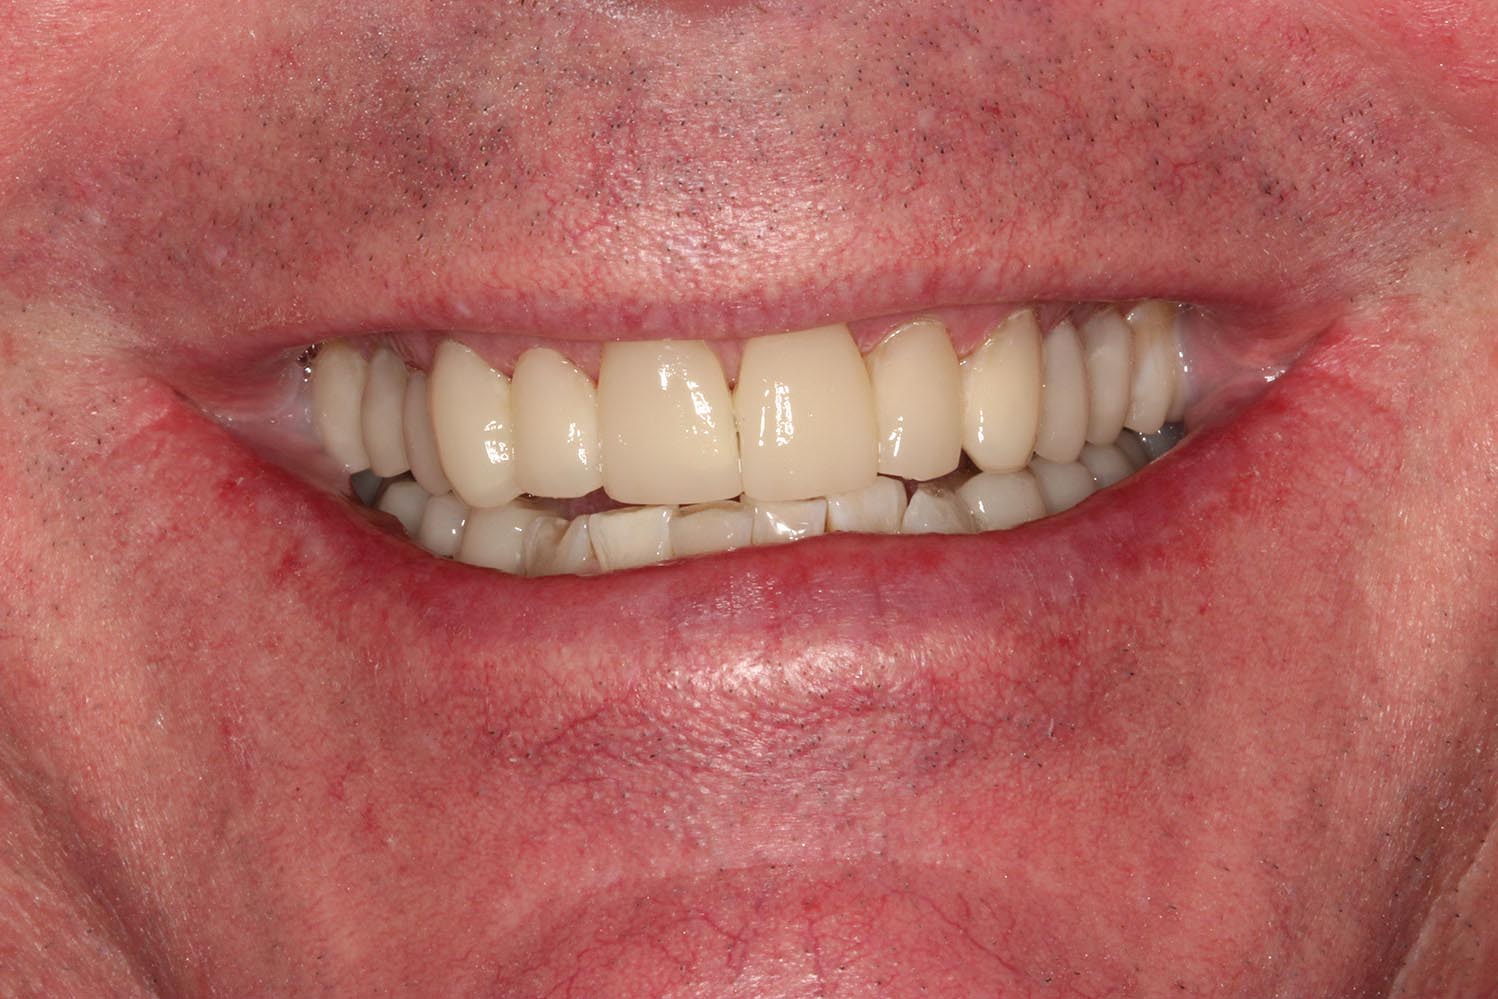 Partially restored teeth and orthodontics